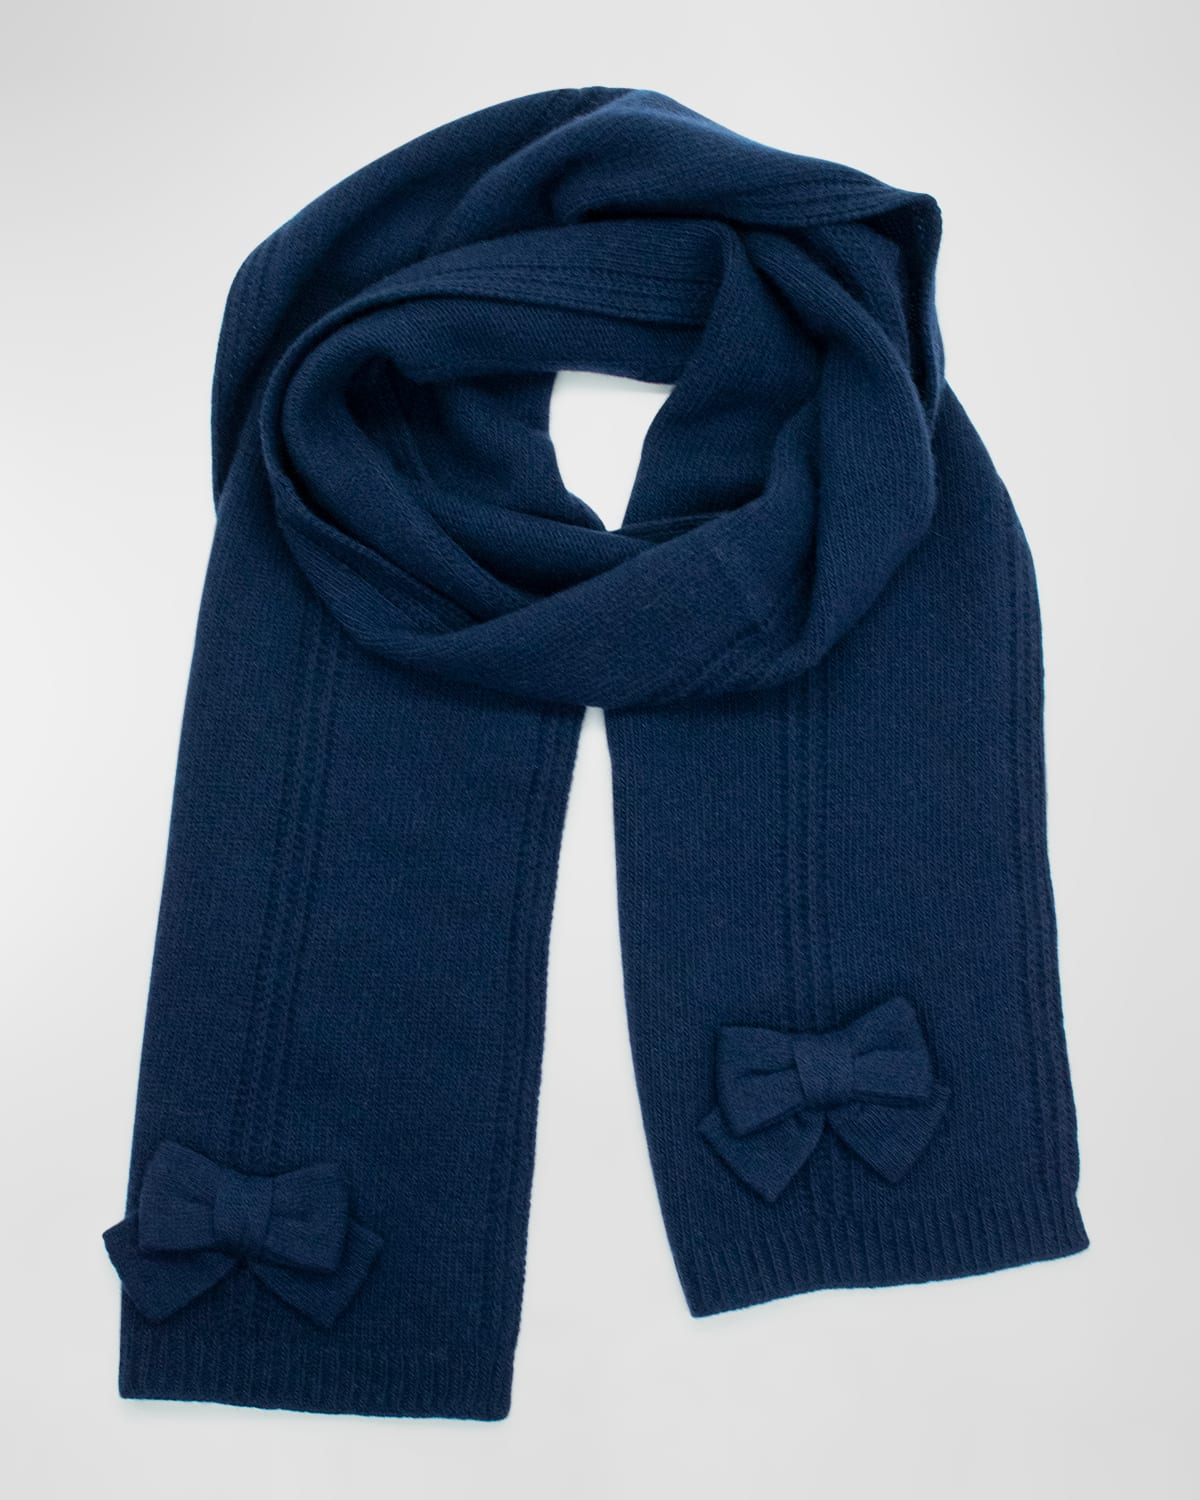 Jersey Knit Bow Cashmere Scarf